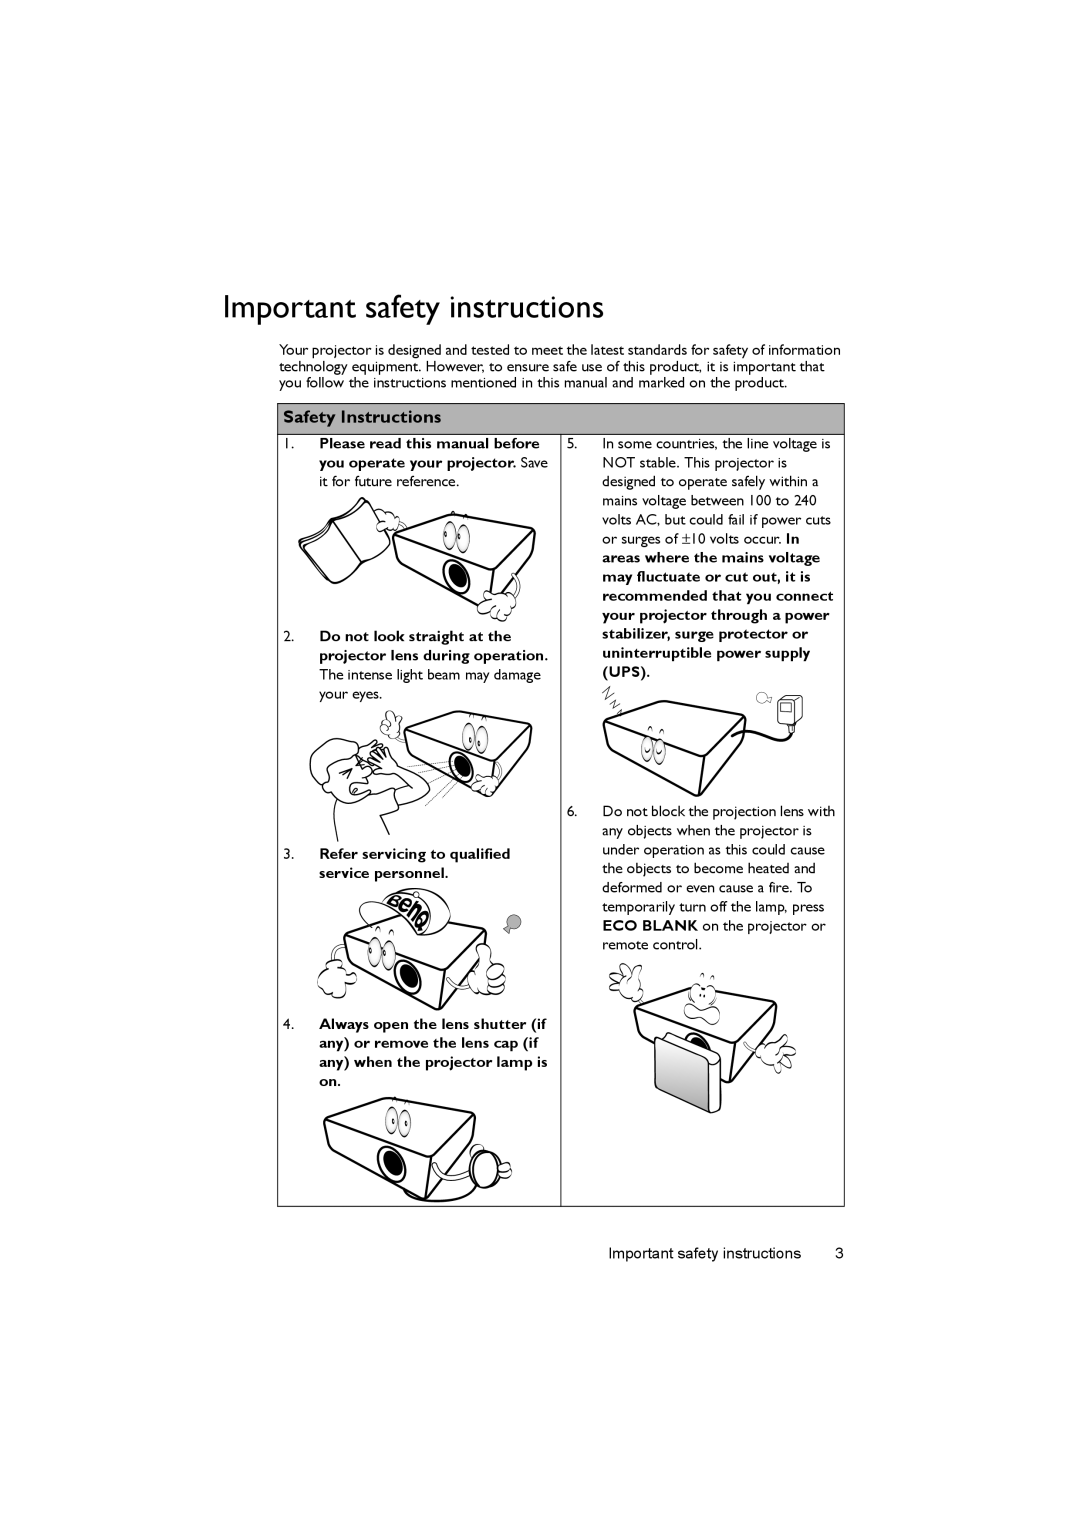 BenQ MX503, MS502 user manual Important safety instructions, Safety Instructions 